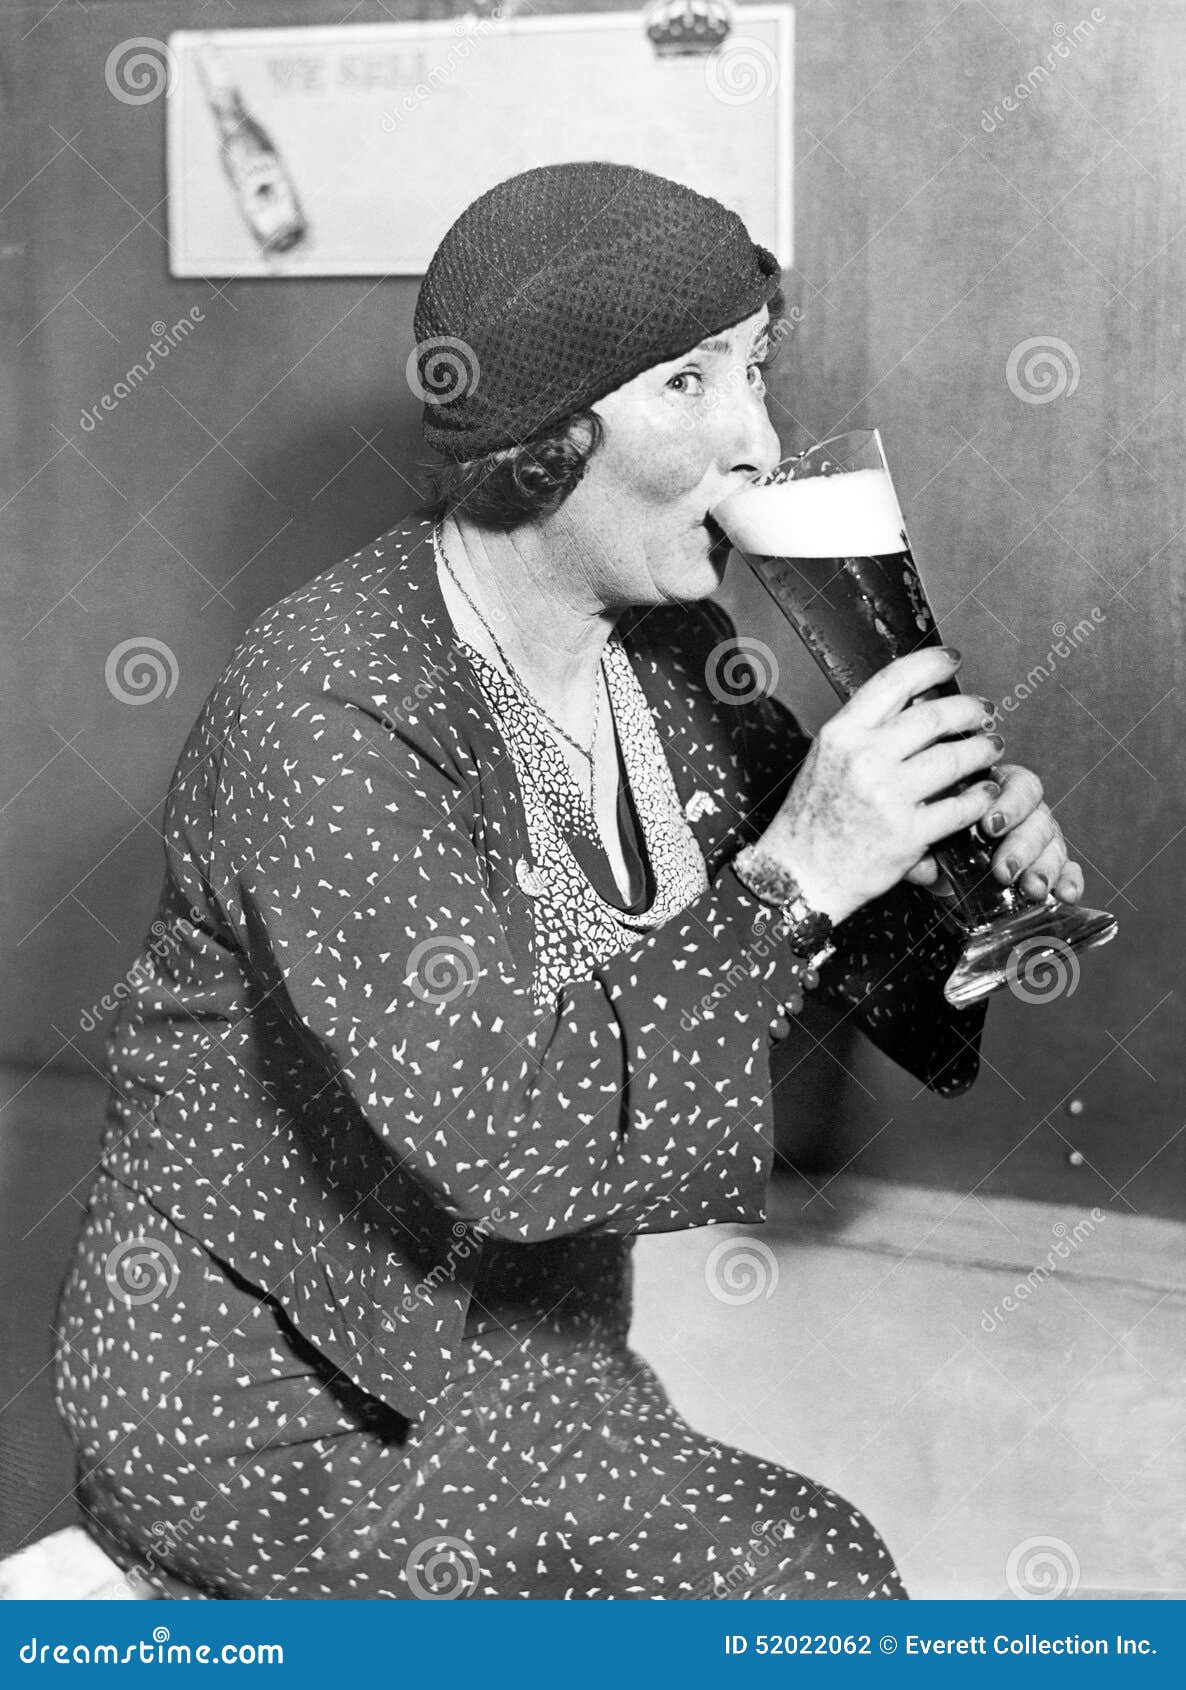 woman drinking out of a big beer glass